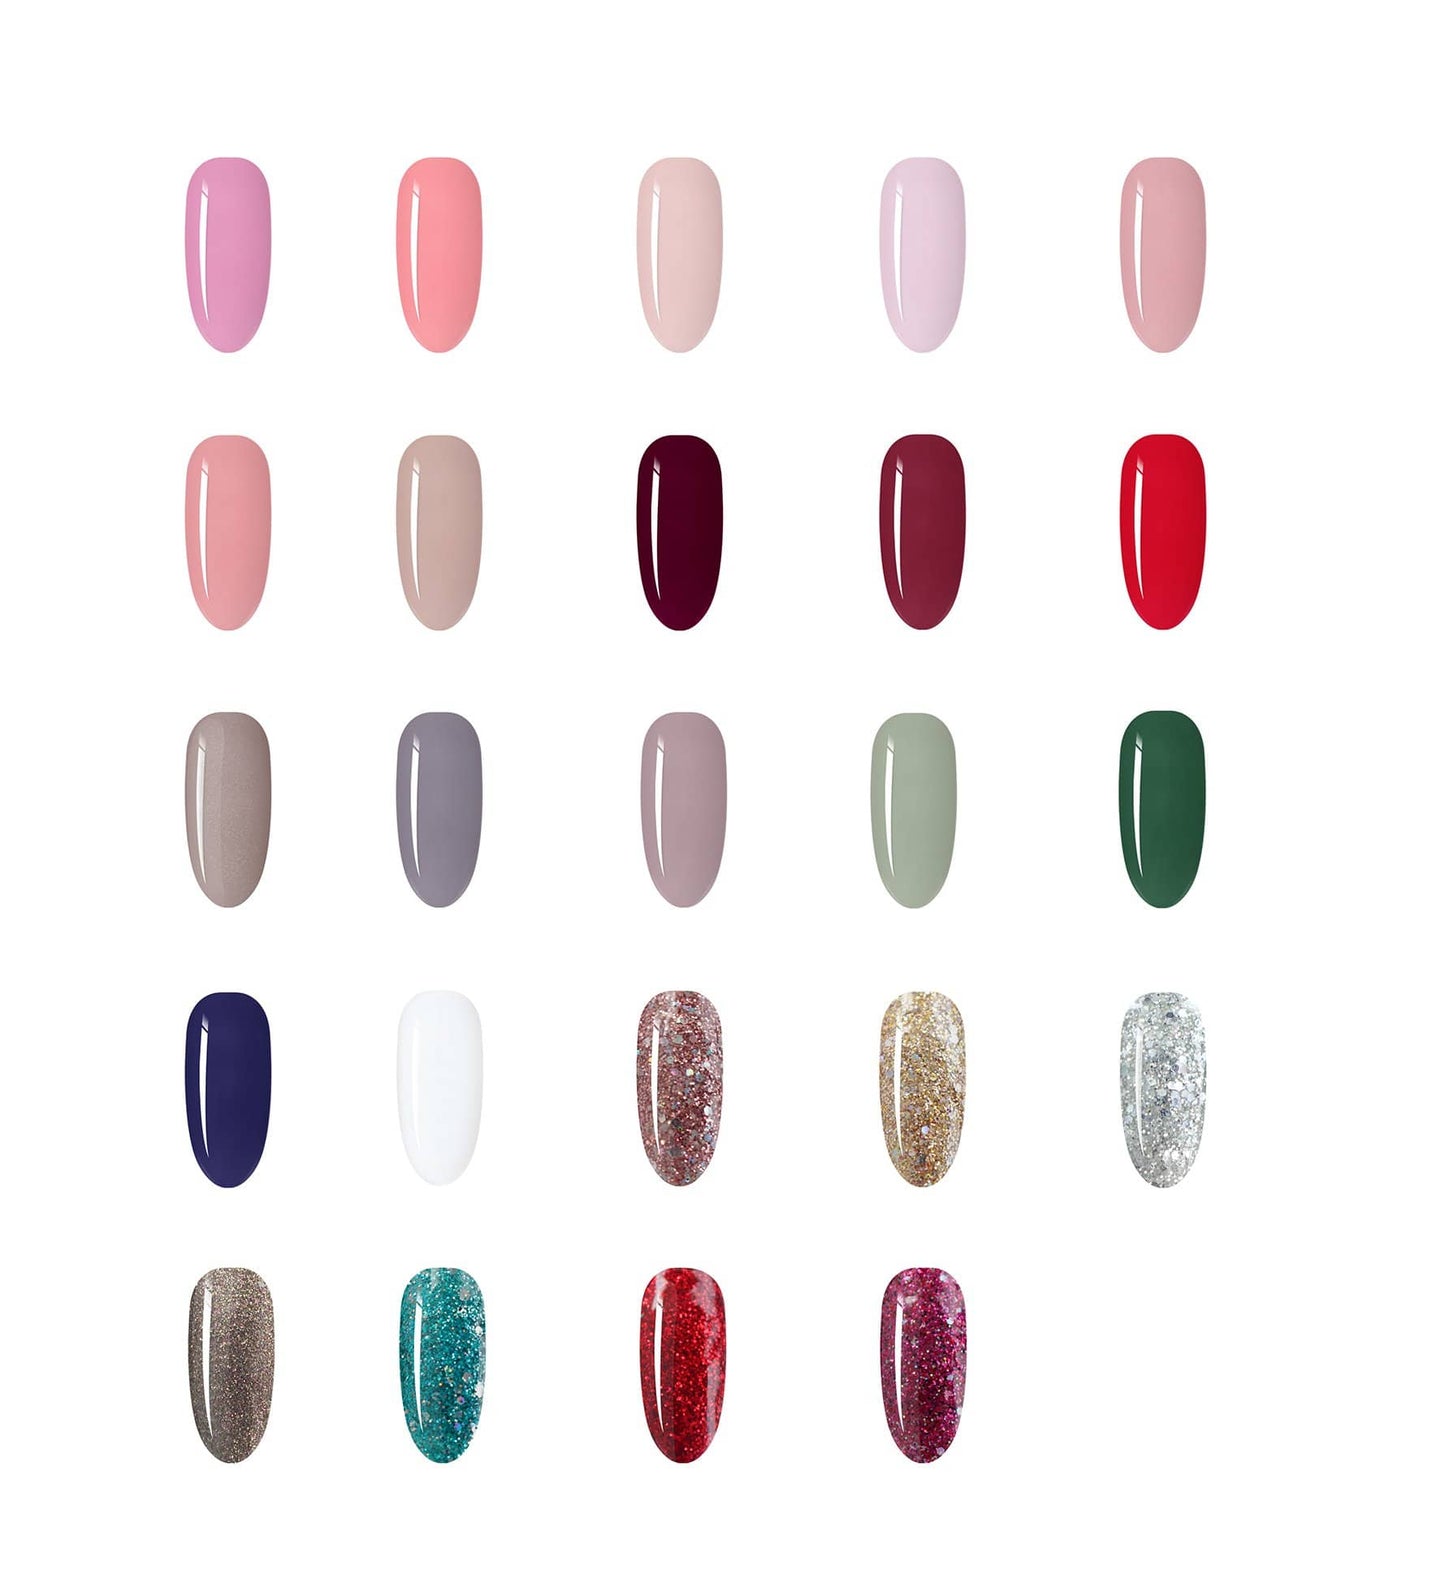 29 gel nail polish colours with base and top coat  100% Gel system Highly pigmented for easy coverage Up to 3 weeks lasting formula LED & UV curable Fast soak-off removal